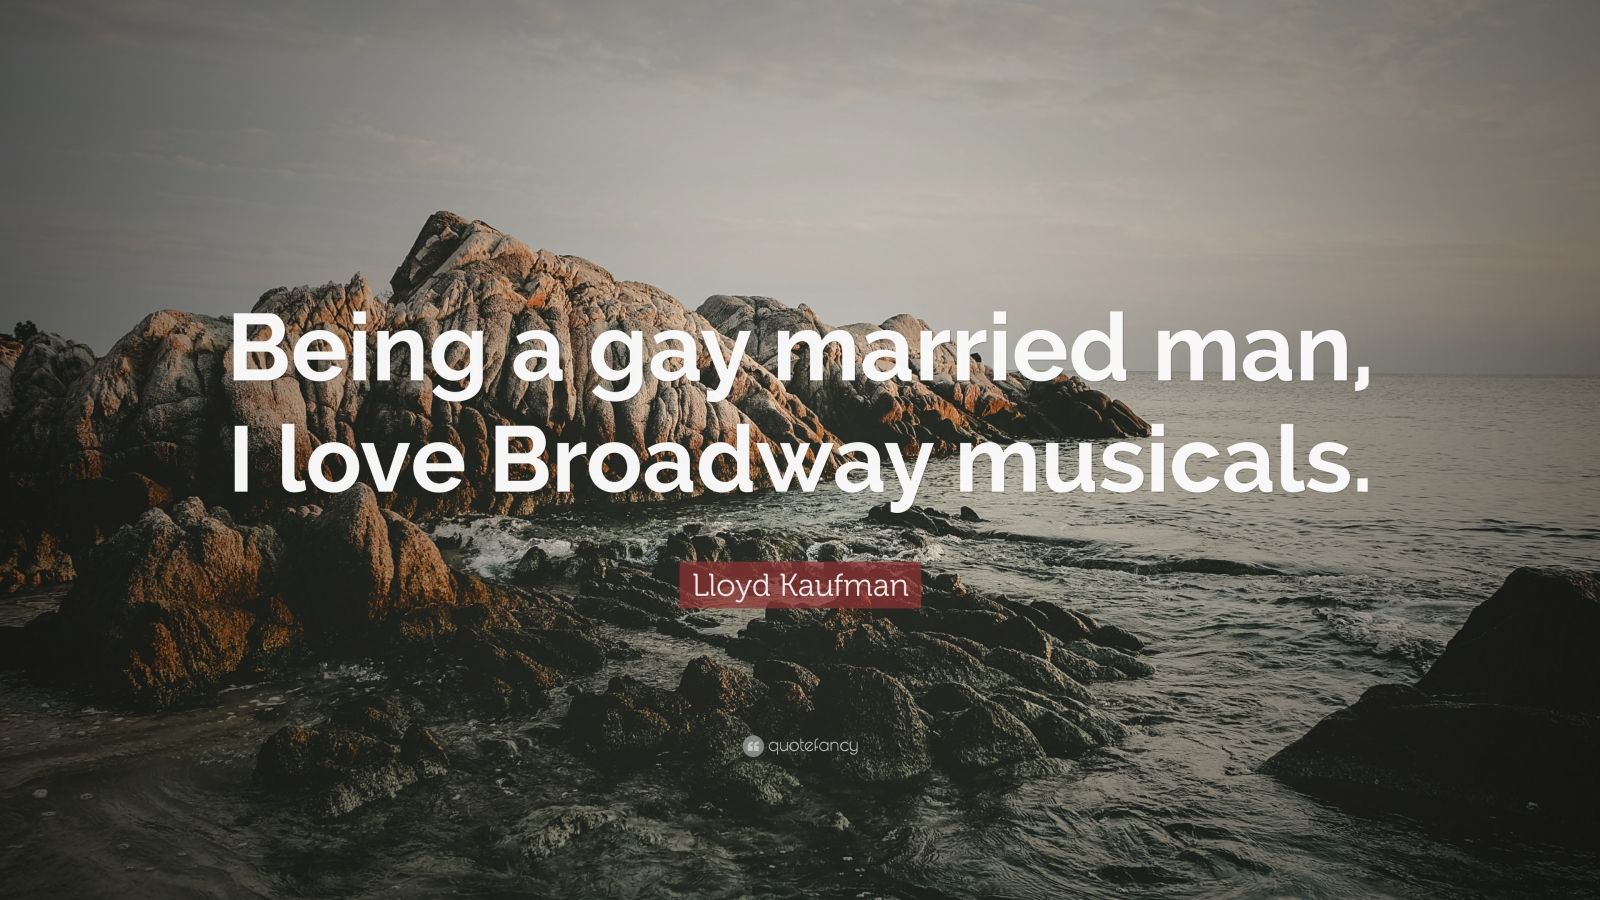 Lloyd Kaufman Quote: "Being a gay married man, I love Broadway musicals."